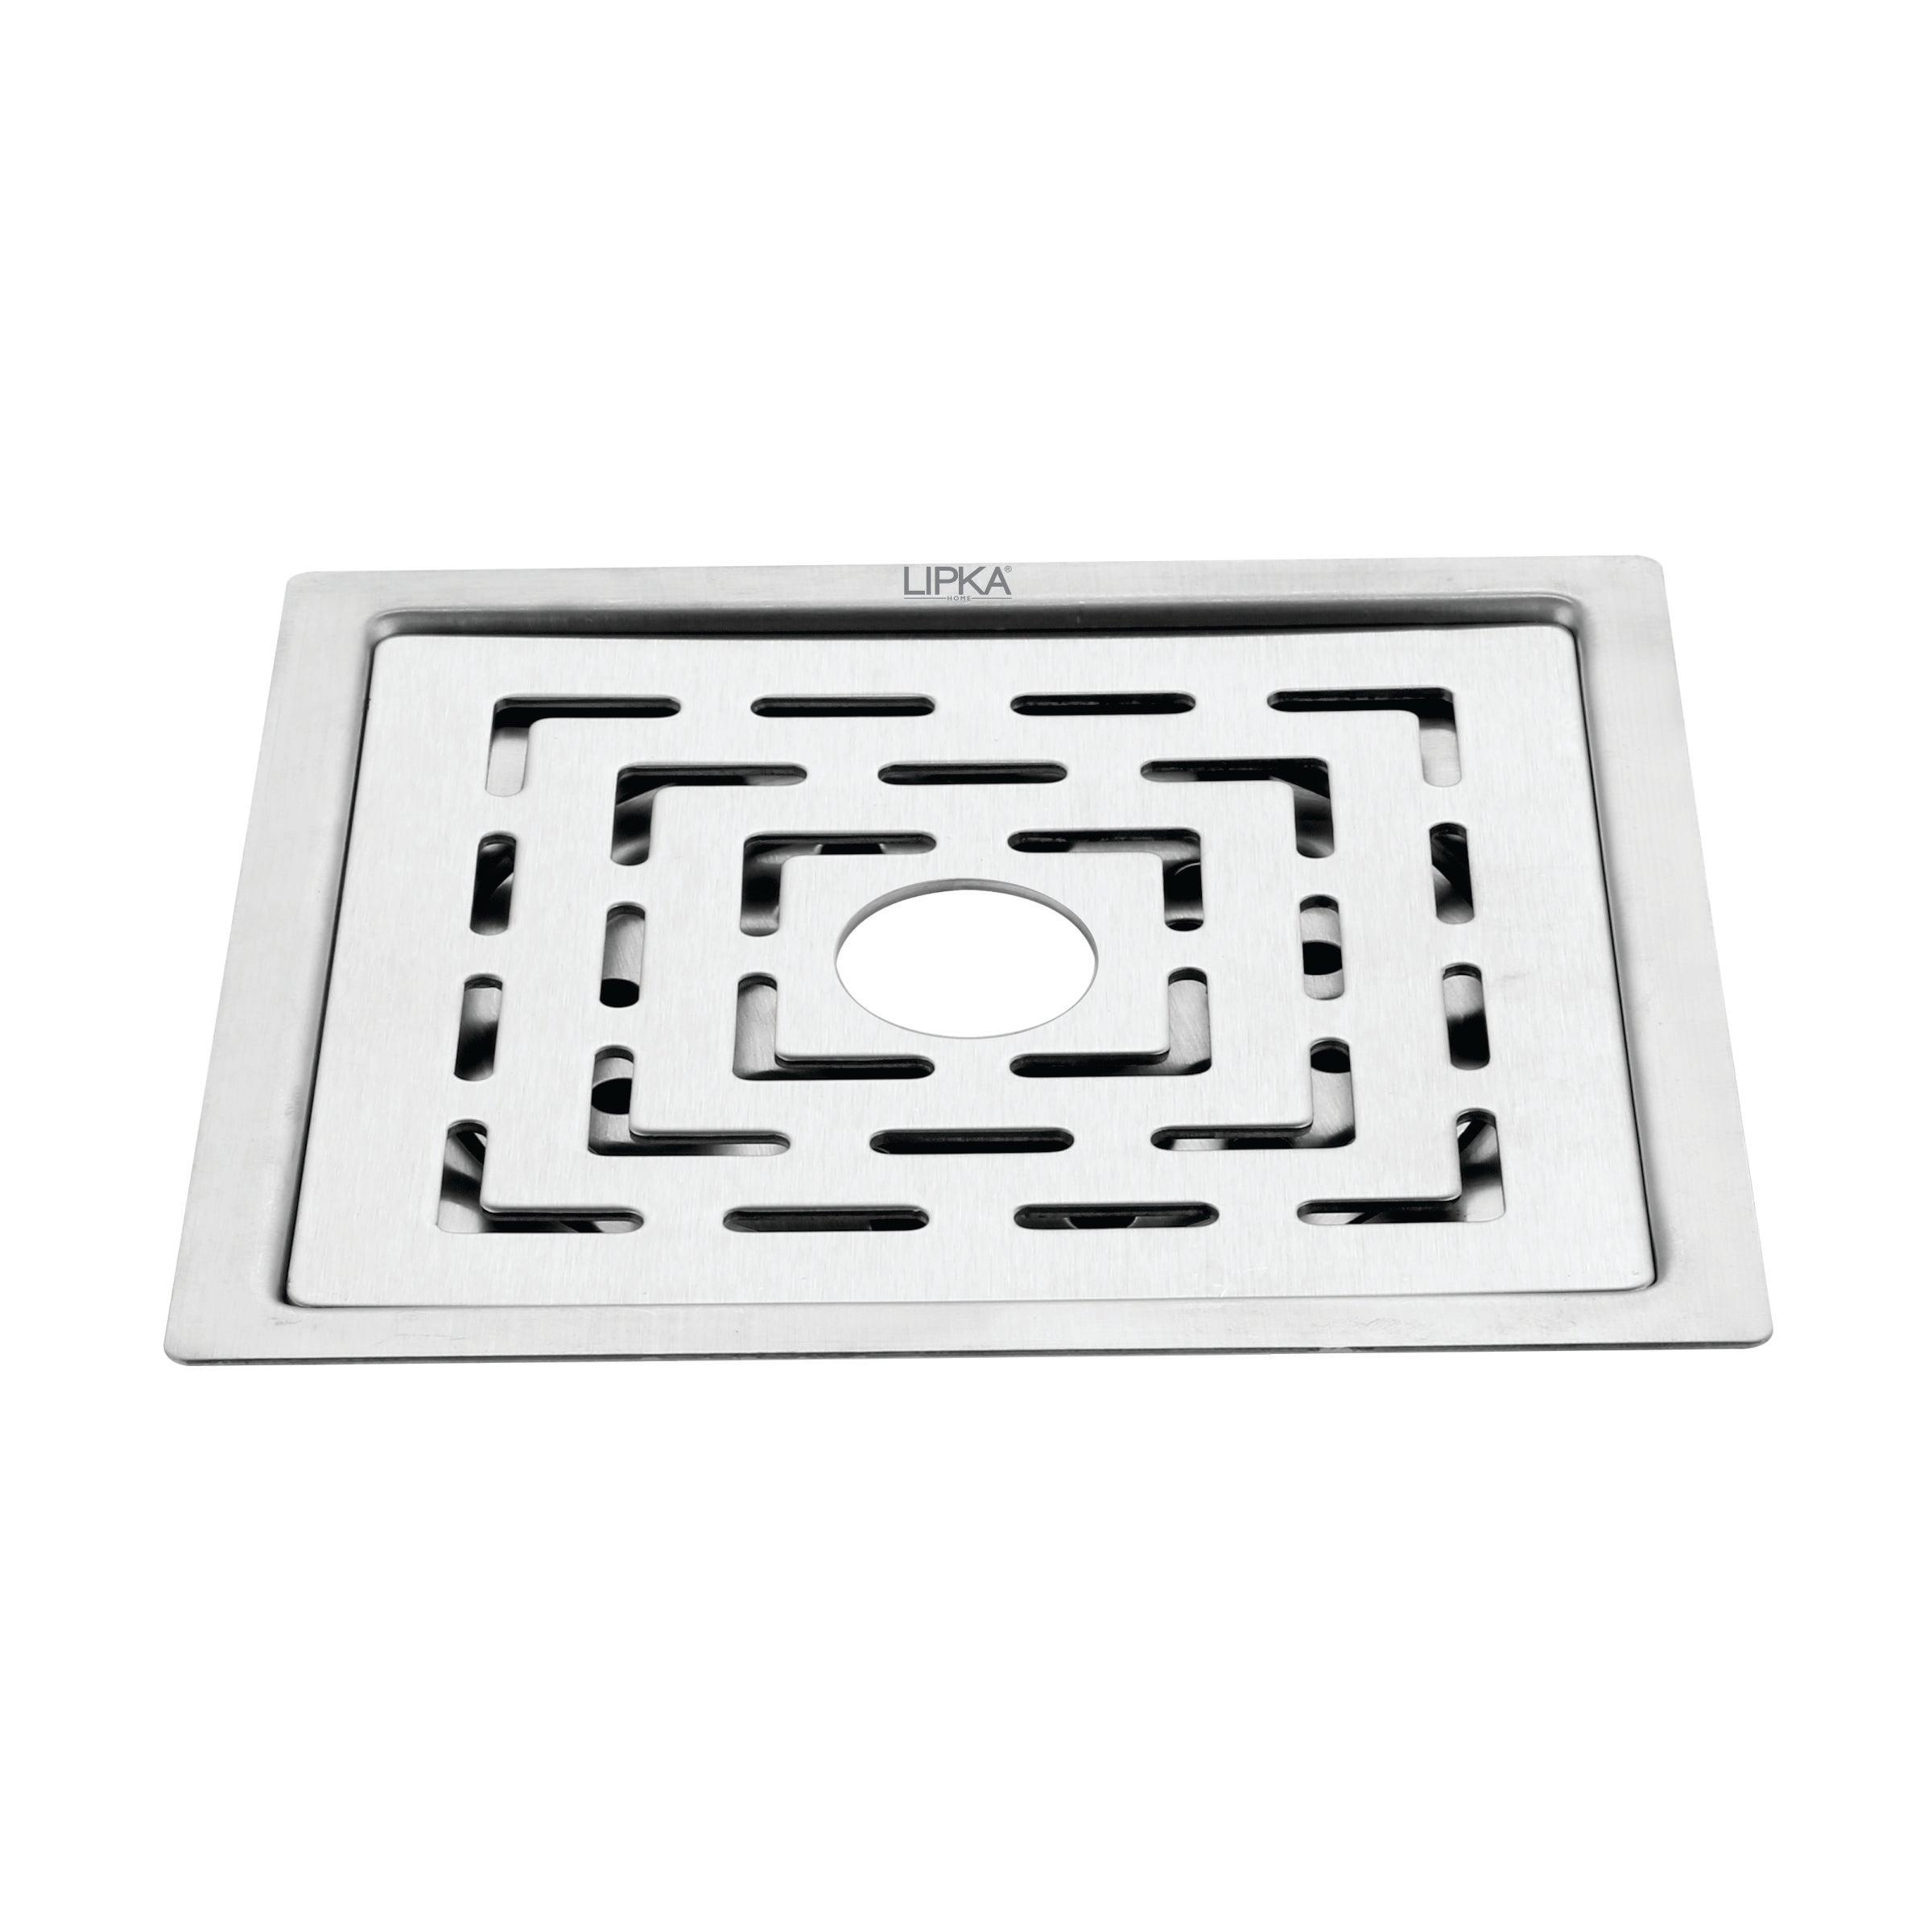 Charlie Deluxe Square Flat Cut Floor Drain (6 x 6 Inches) with Hole